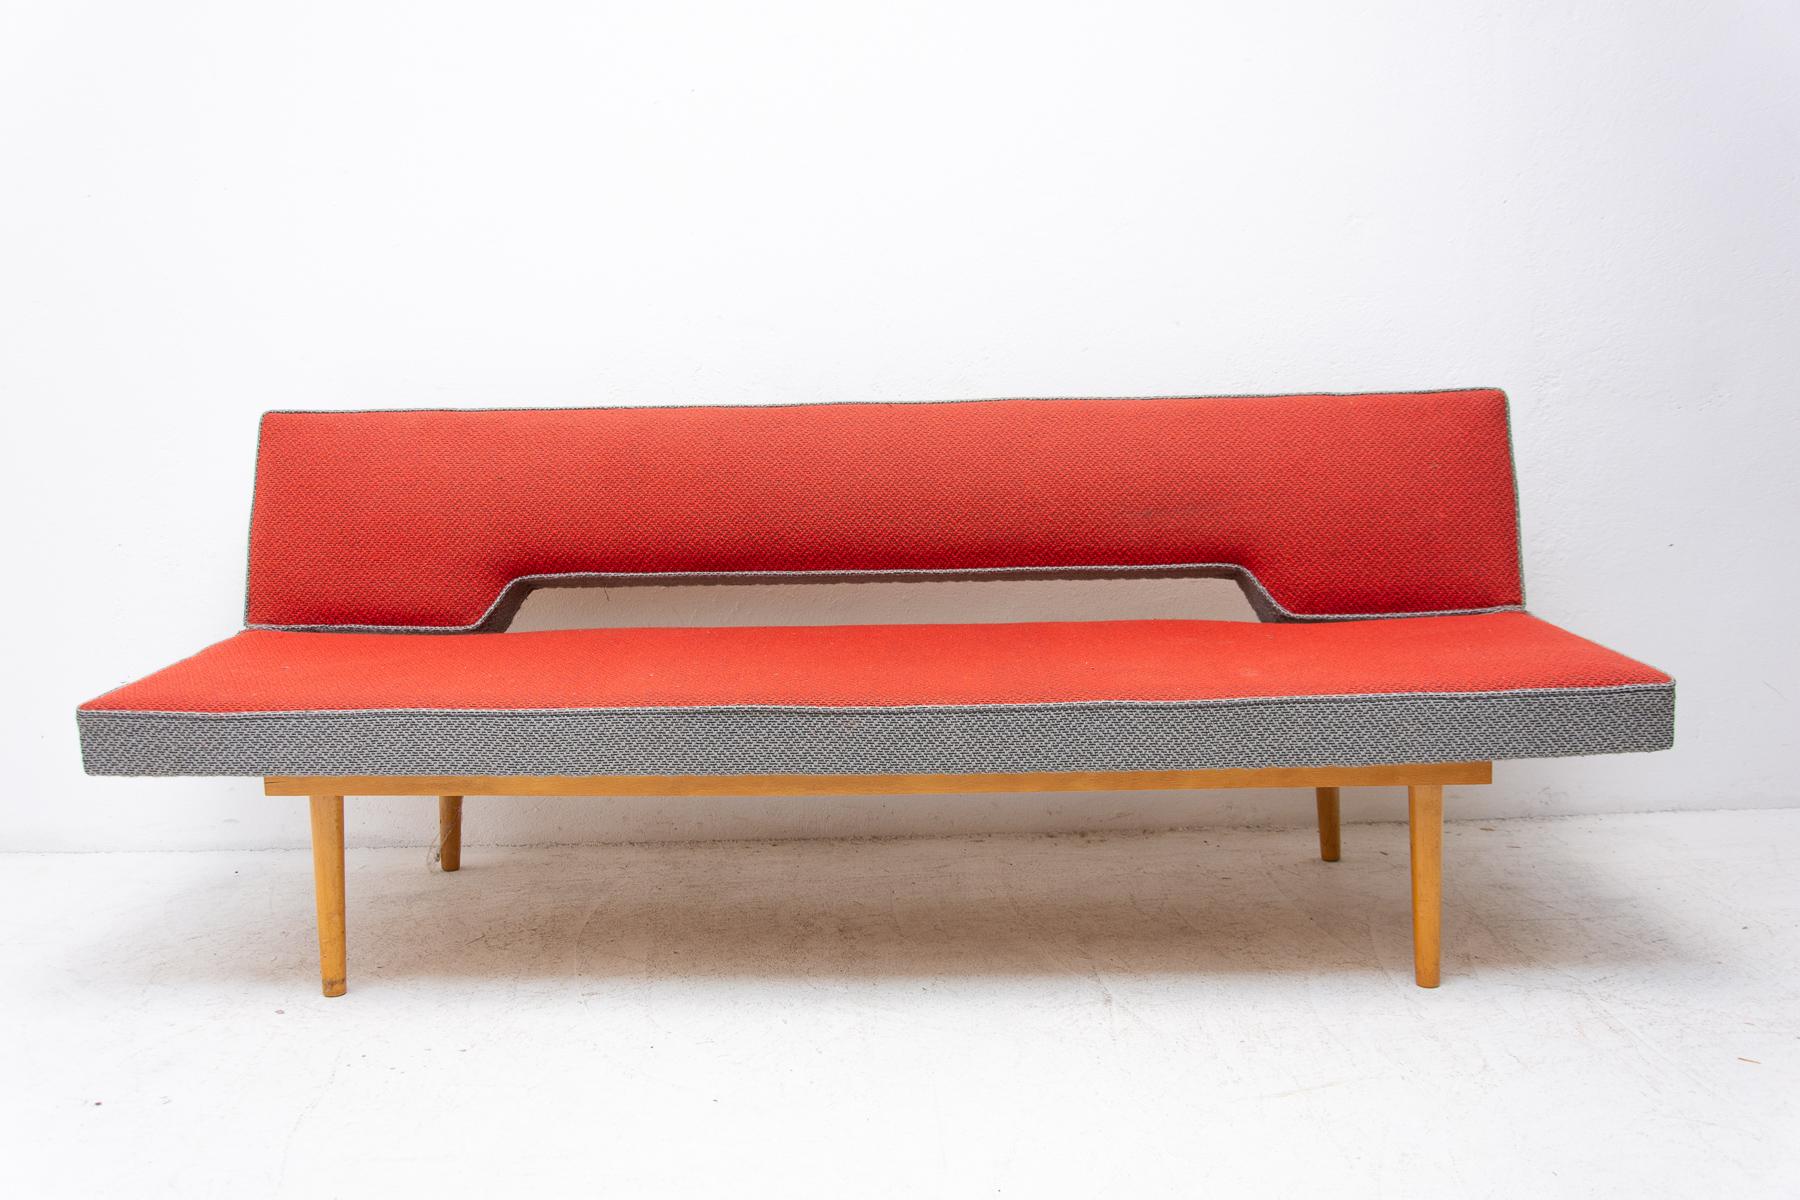 Midcentury adjustable sofa-bench designed by the Czech famous designer Miroslav Navrátil in the 1960s. Made in Czechoslovakia. It features wery attractive and simple design. Material: fabric, beechwood. It´s a typical example of Czechoslovak design